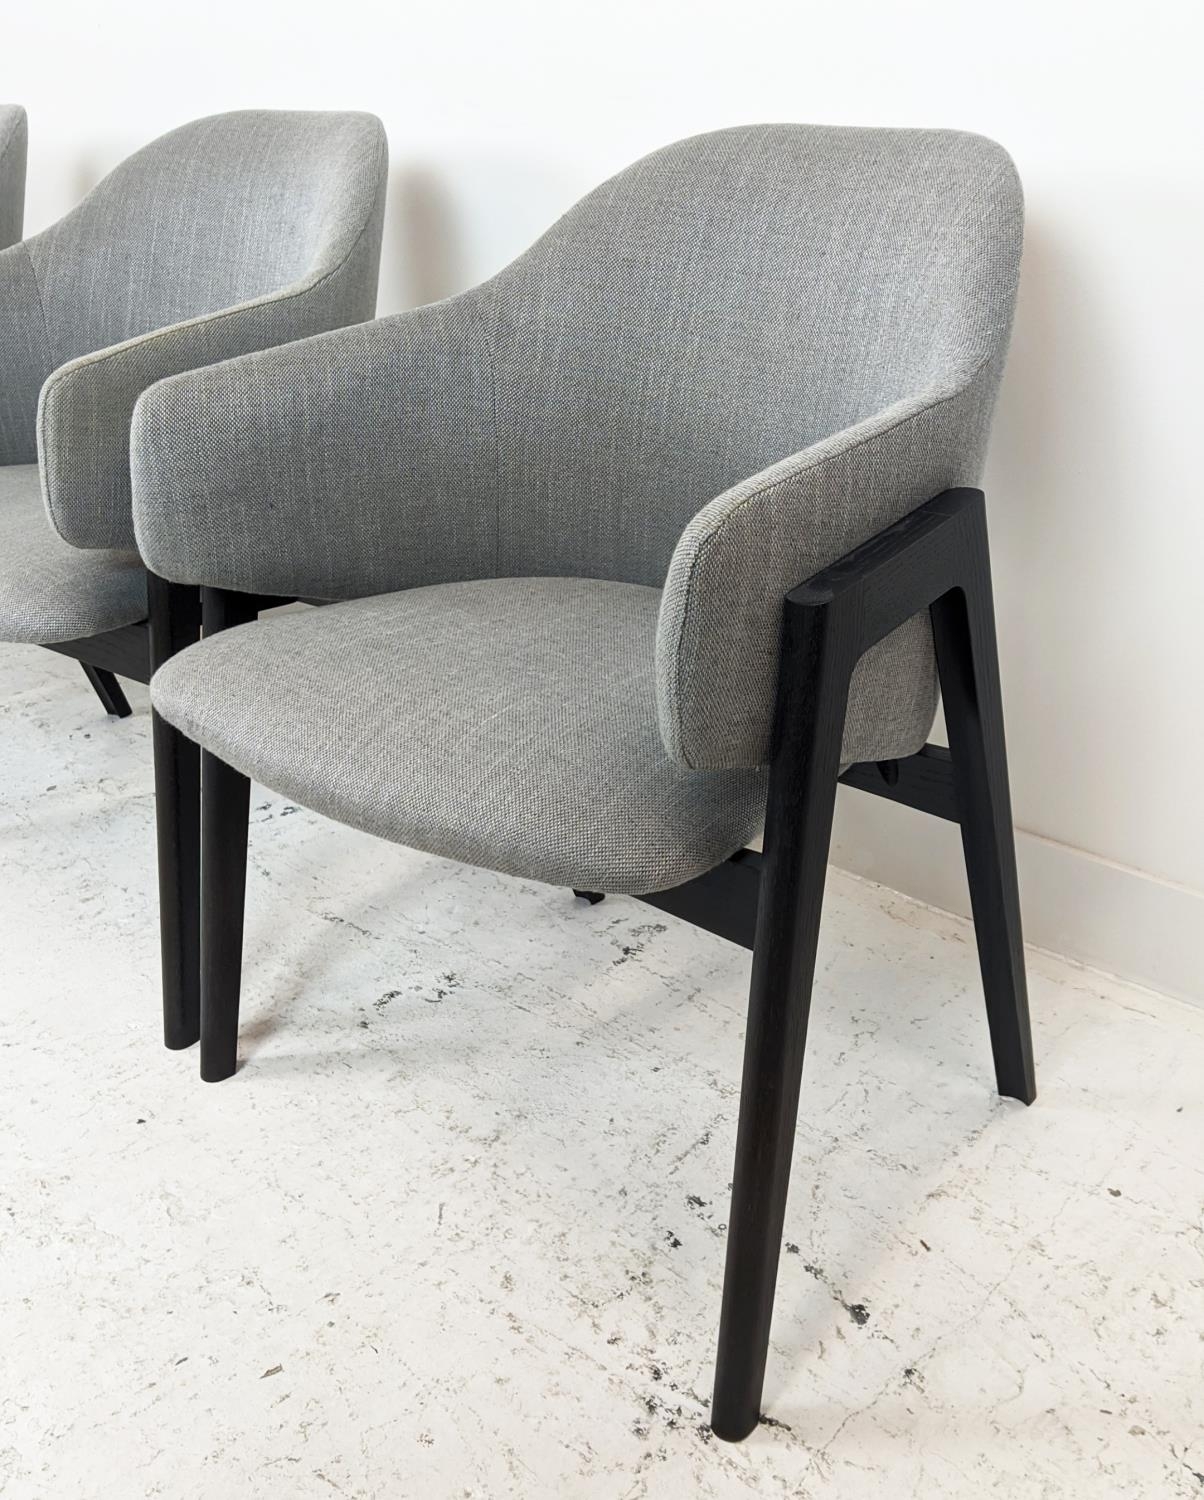 LINLEY SAVILLE DINING CHAIRS, a set of four, by Matthew Hilton, 80cm H approx. (4) - Image 6 of 11